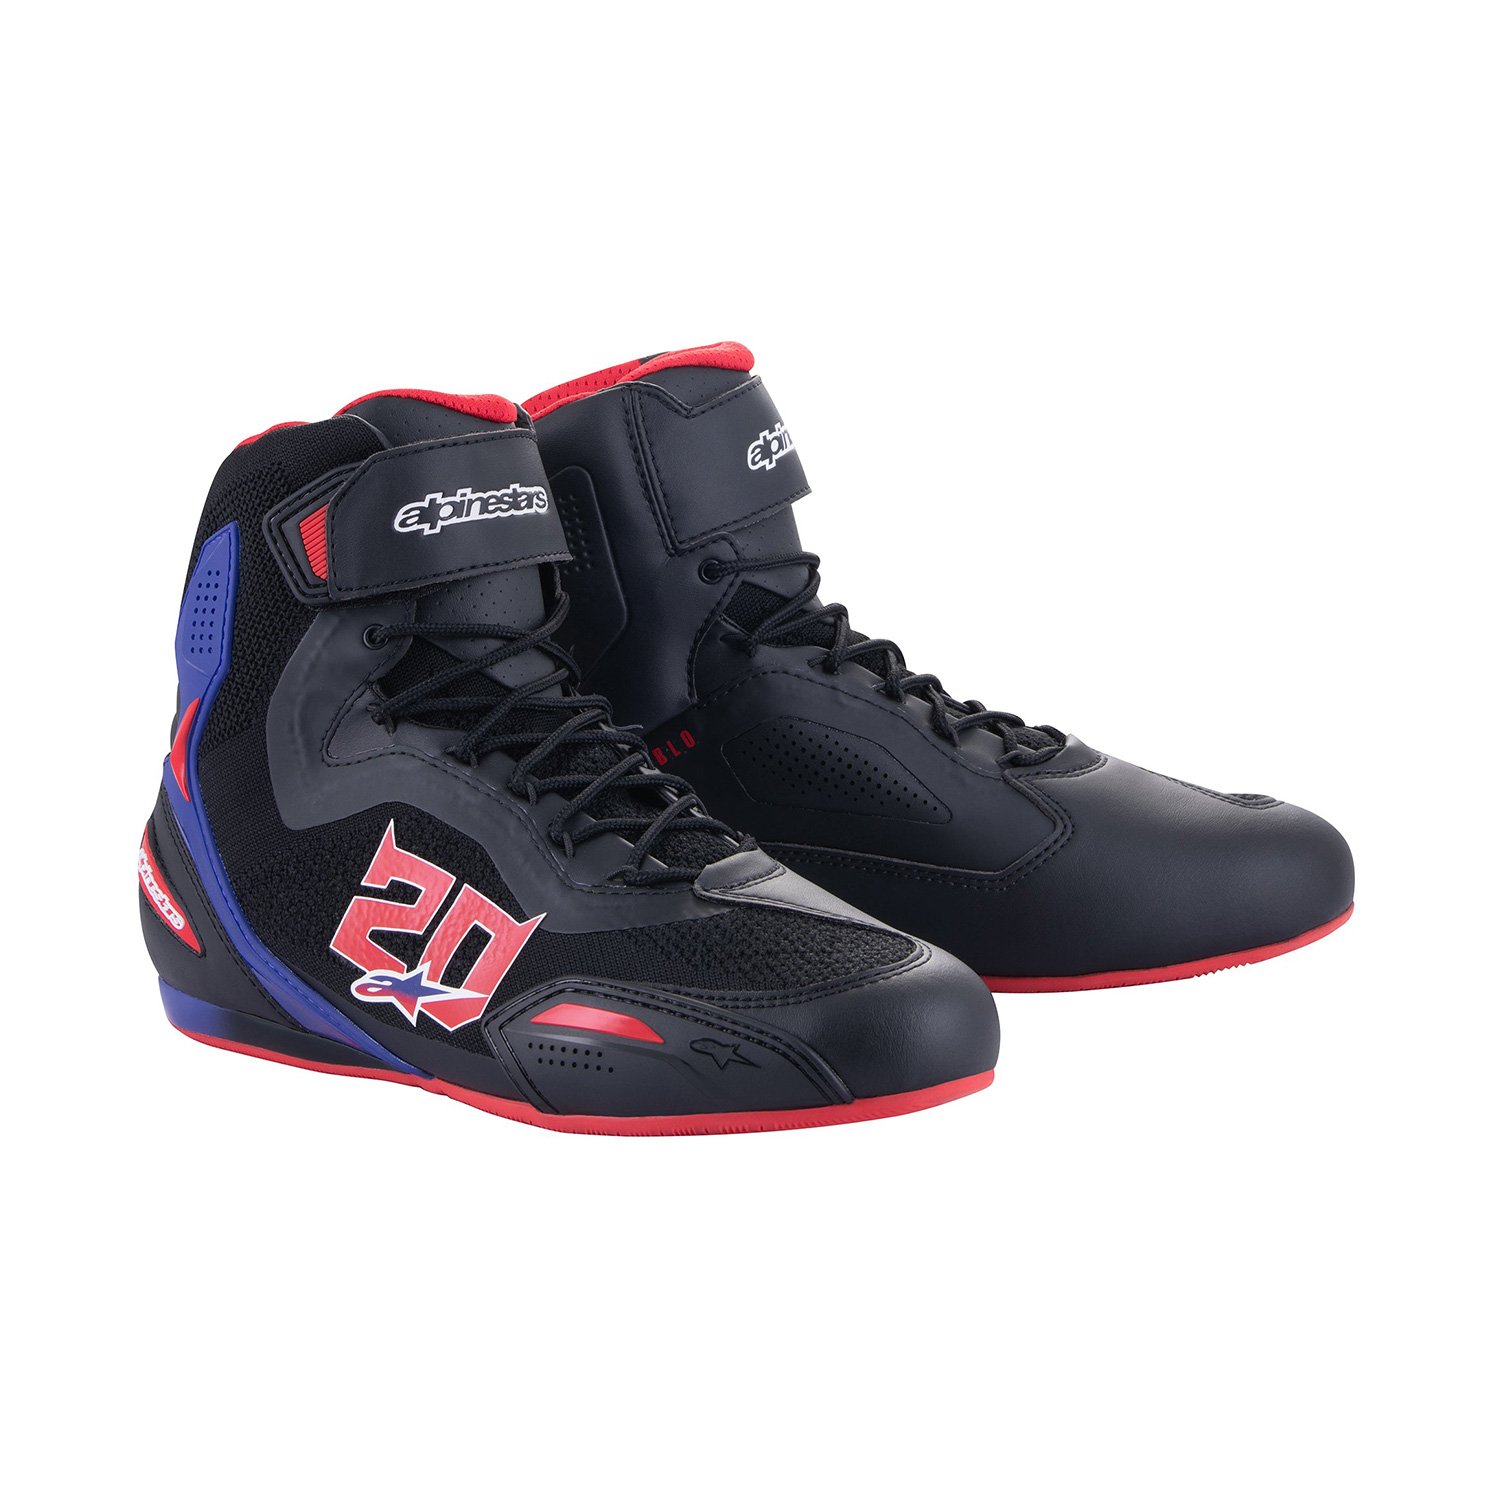 Image of EU Alpinestars FQ20 Faster-3 Rideknit Noir Bright Rouge Bleu Chaussures Taille US 7